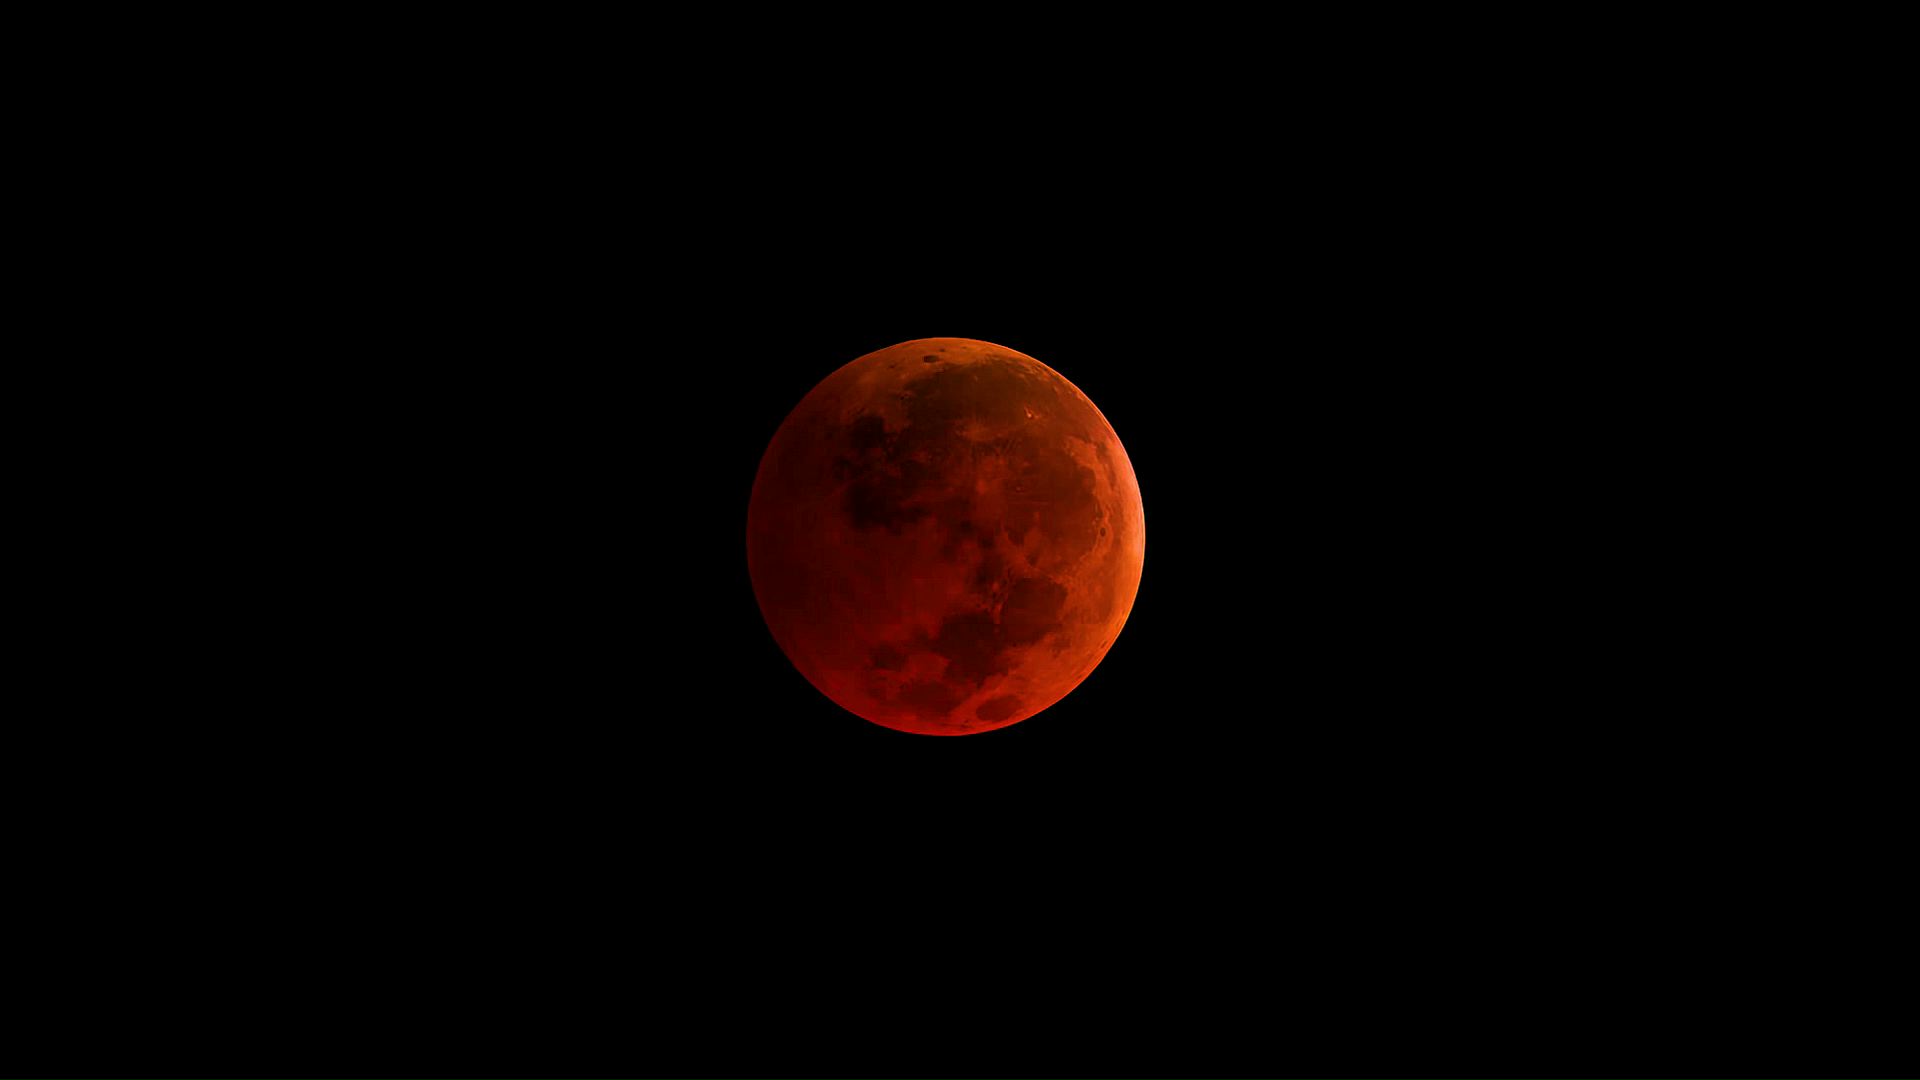 Chicago Not Well Placed For Super Blue Blood Moon News